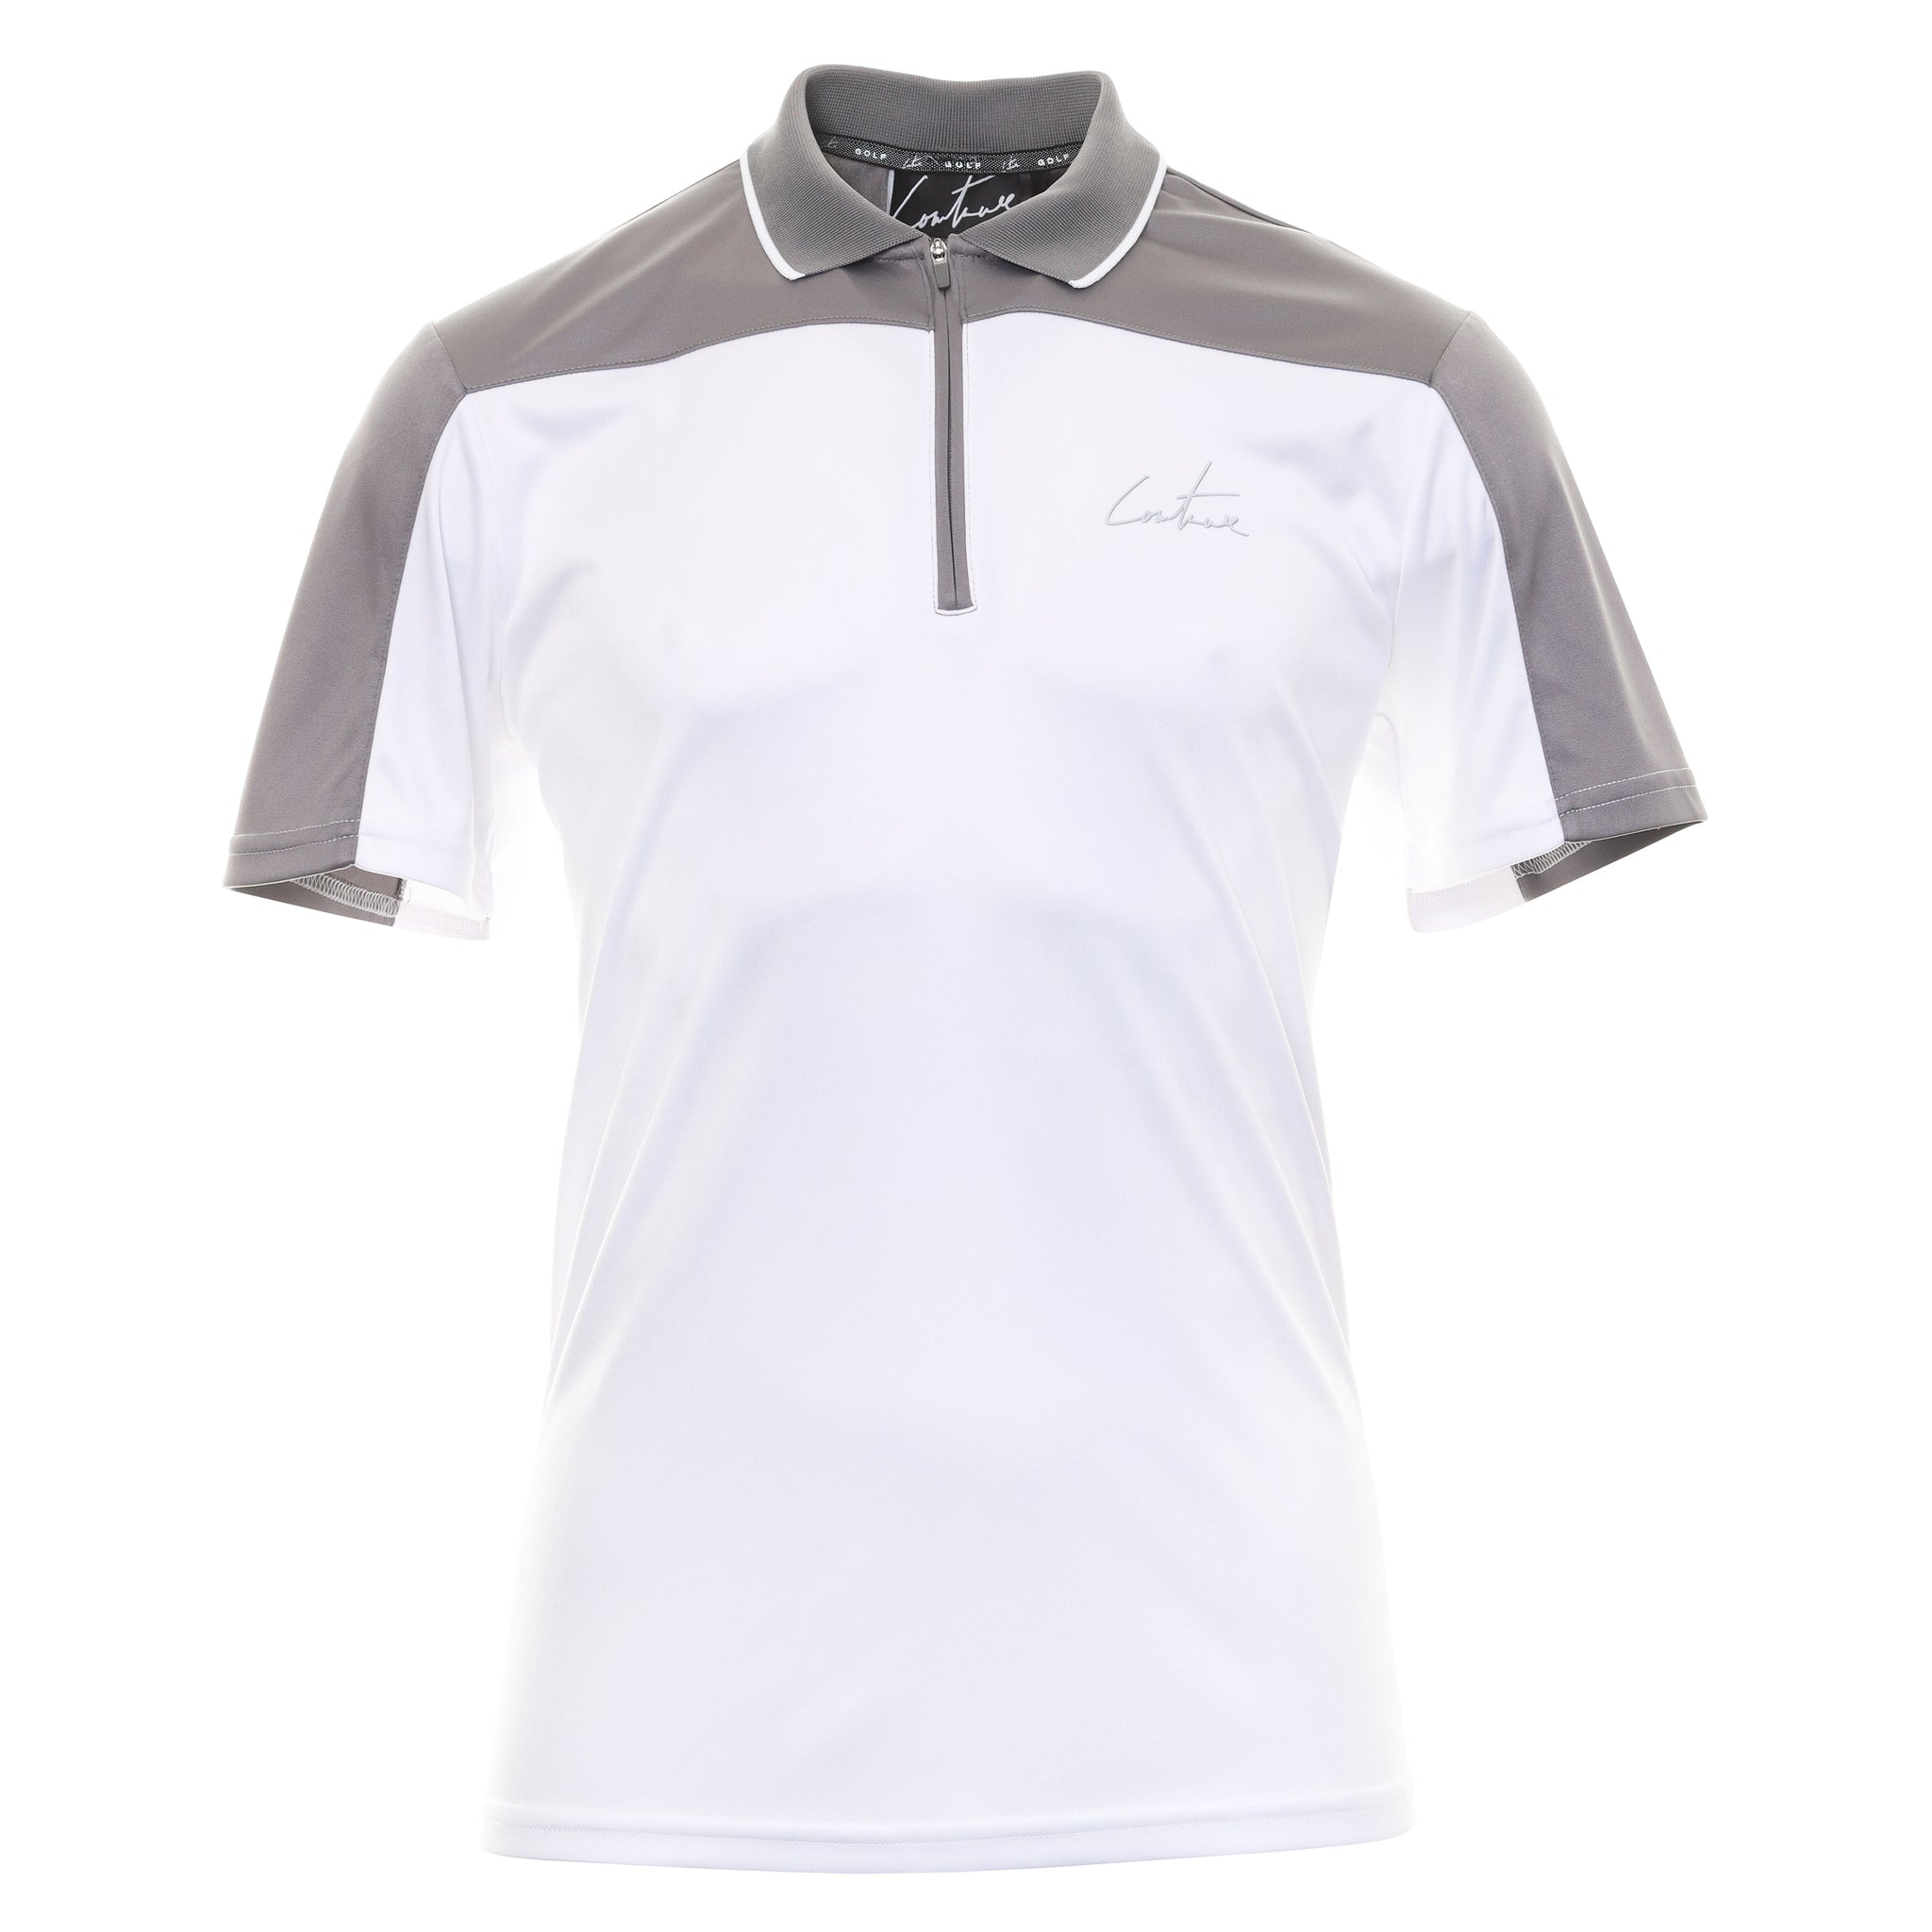 couture-club-golf-panelled-1-4-shirt-tccm1977-grey-white